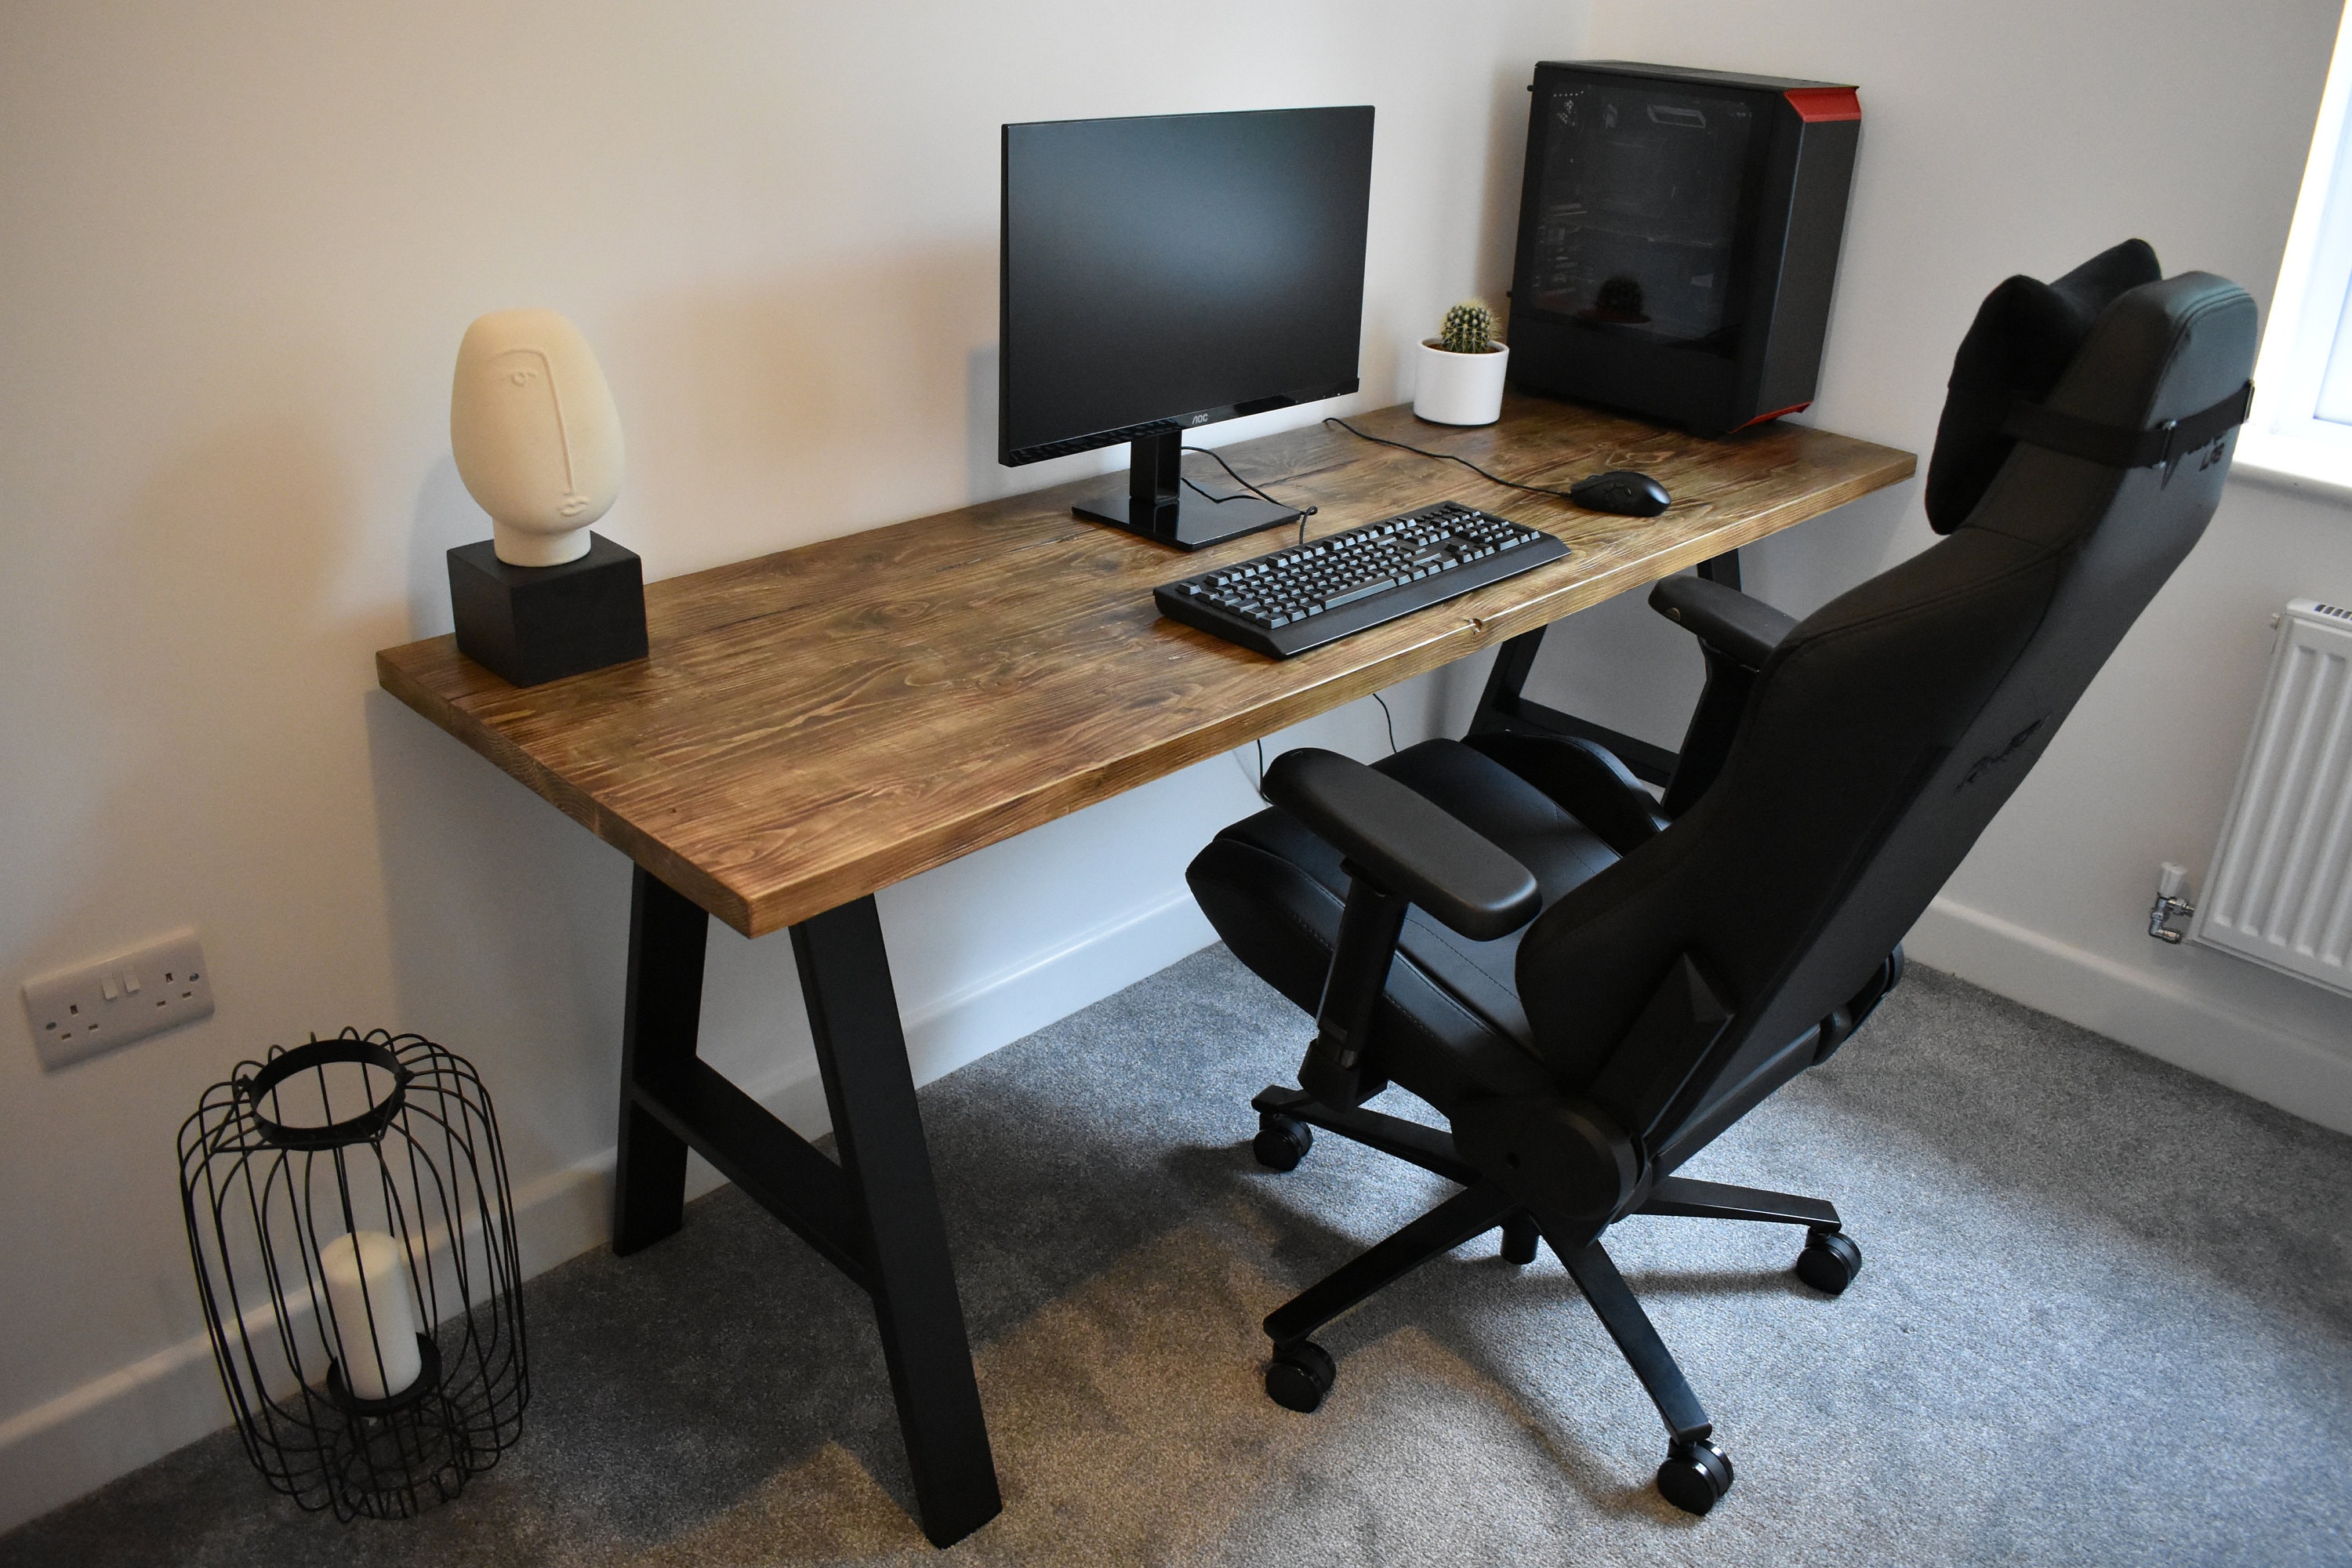 The GG Gaming Desk Rustic Meets Industrial, Solid Wood, Heavy Duty Gaming  Desk -  UK